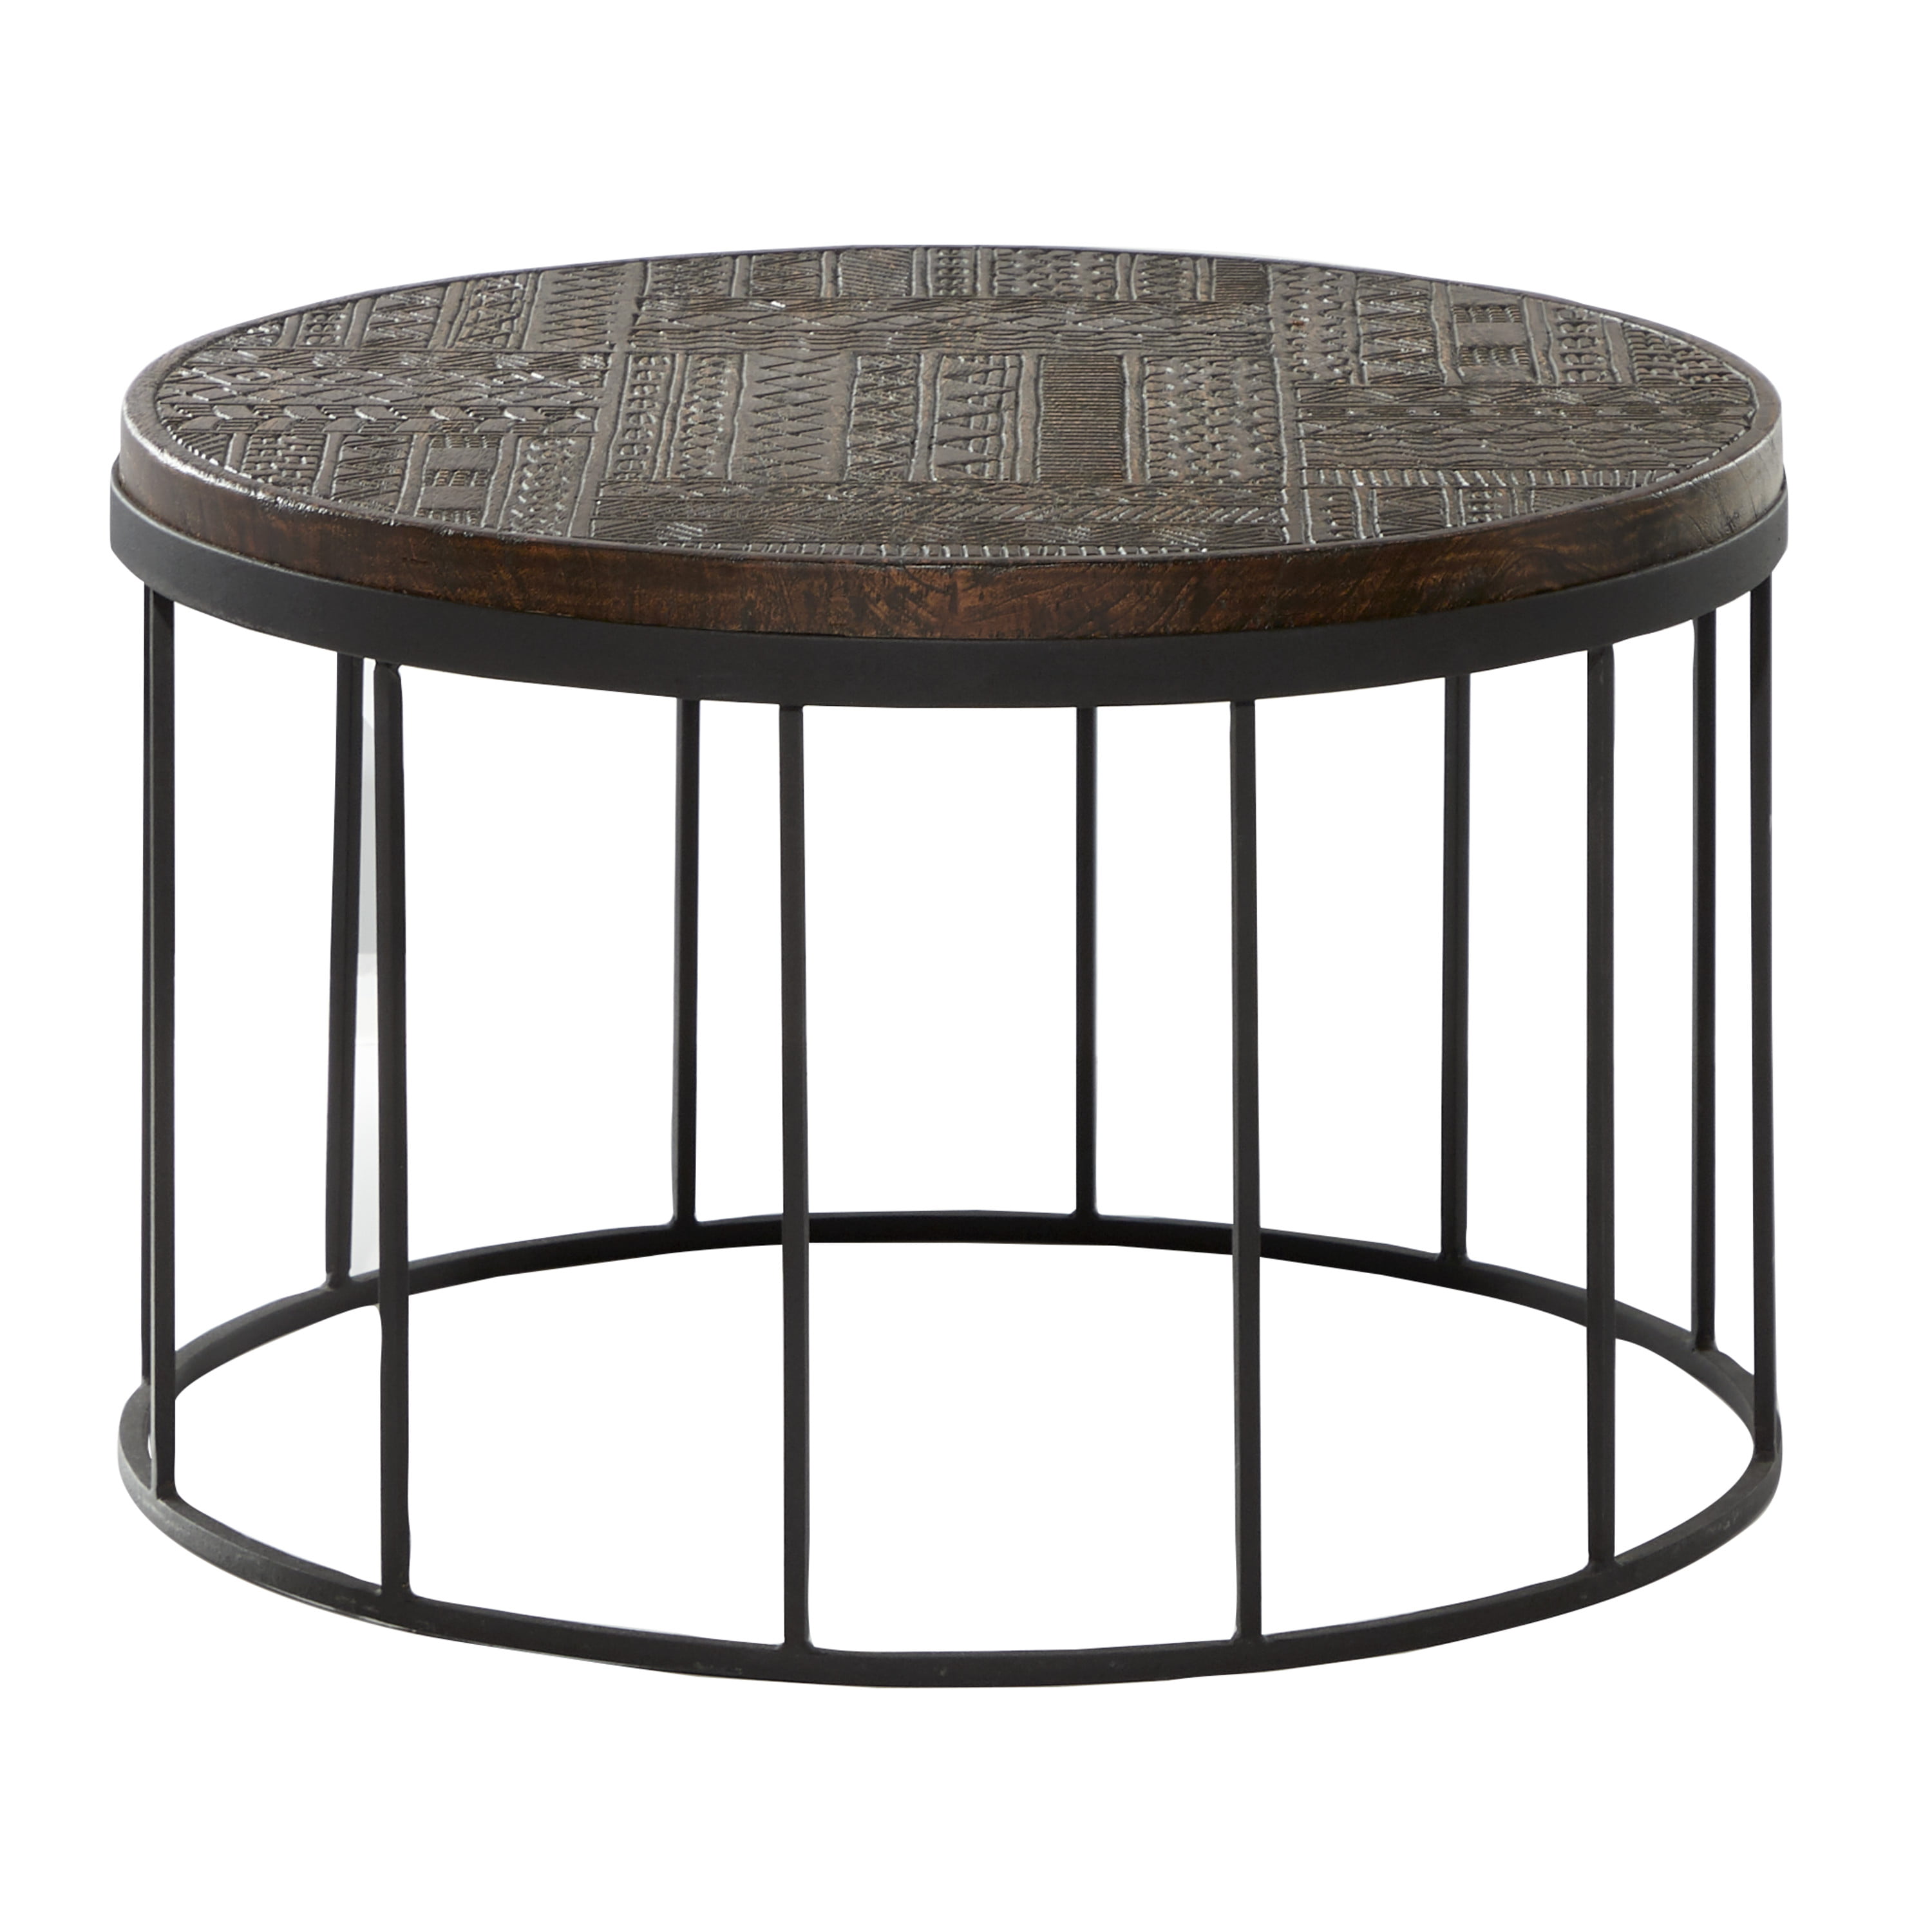 Decmode Decorative Carved Round Wood Coffee Table with Metal Base, 25